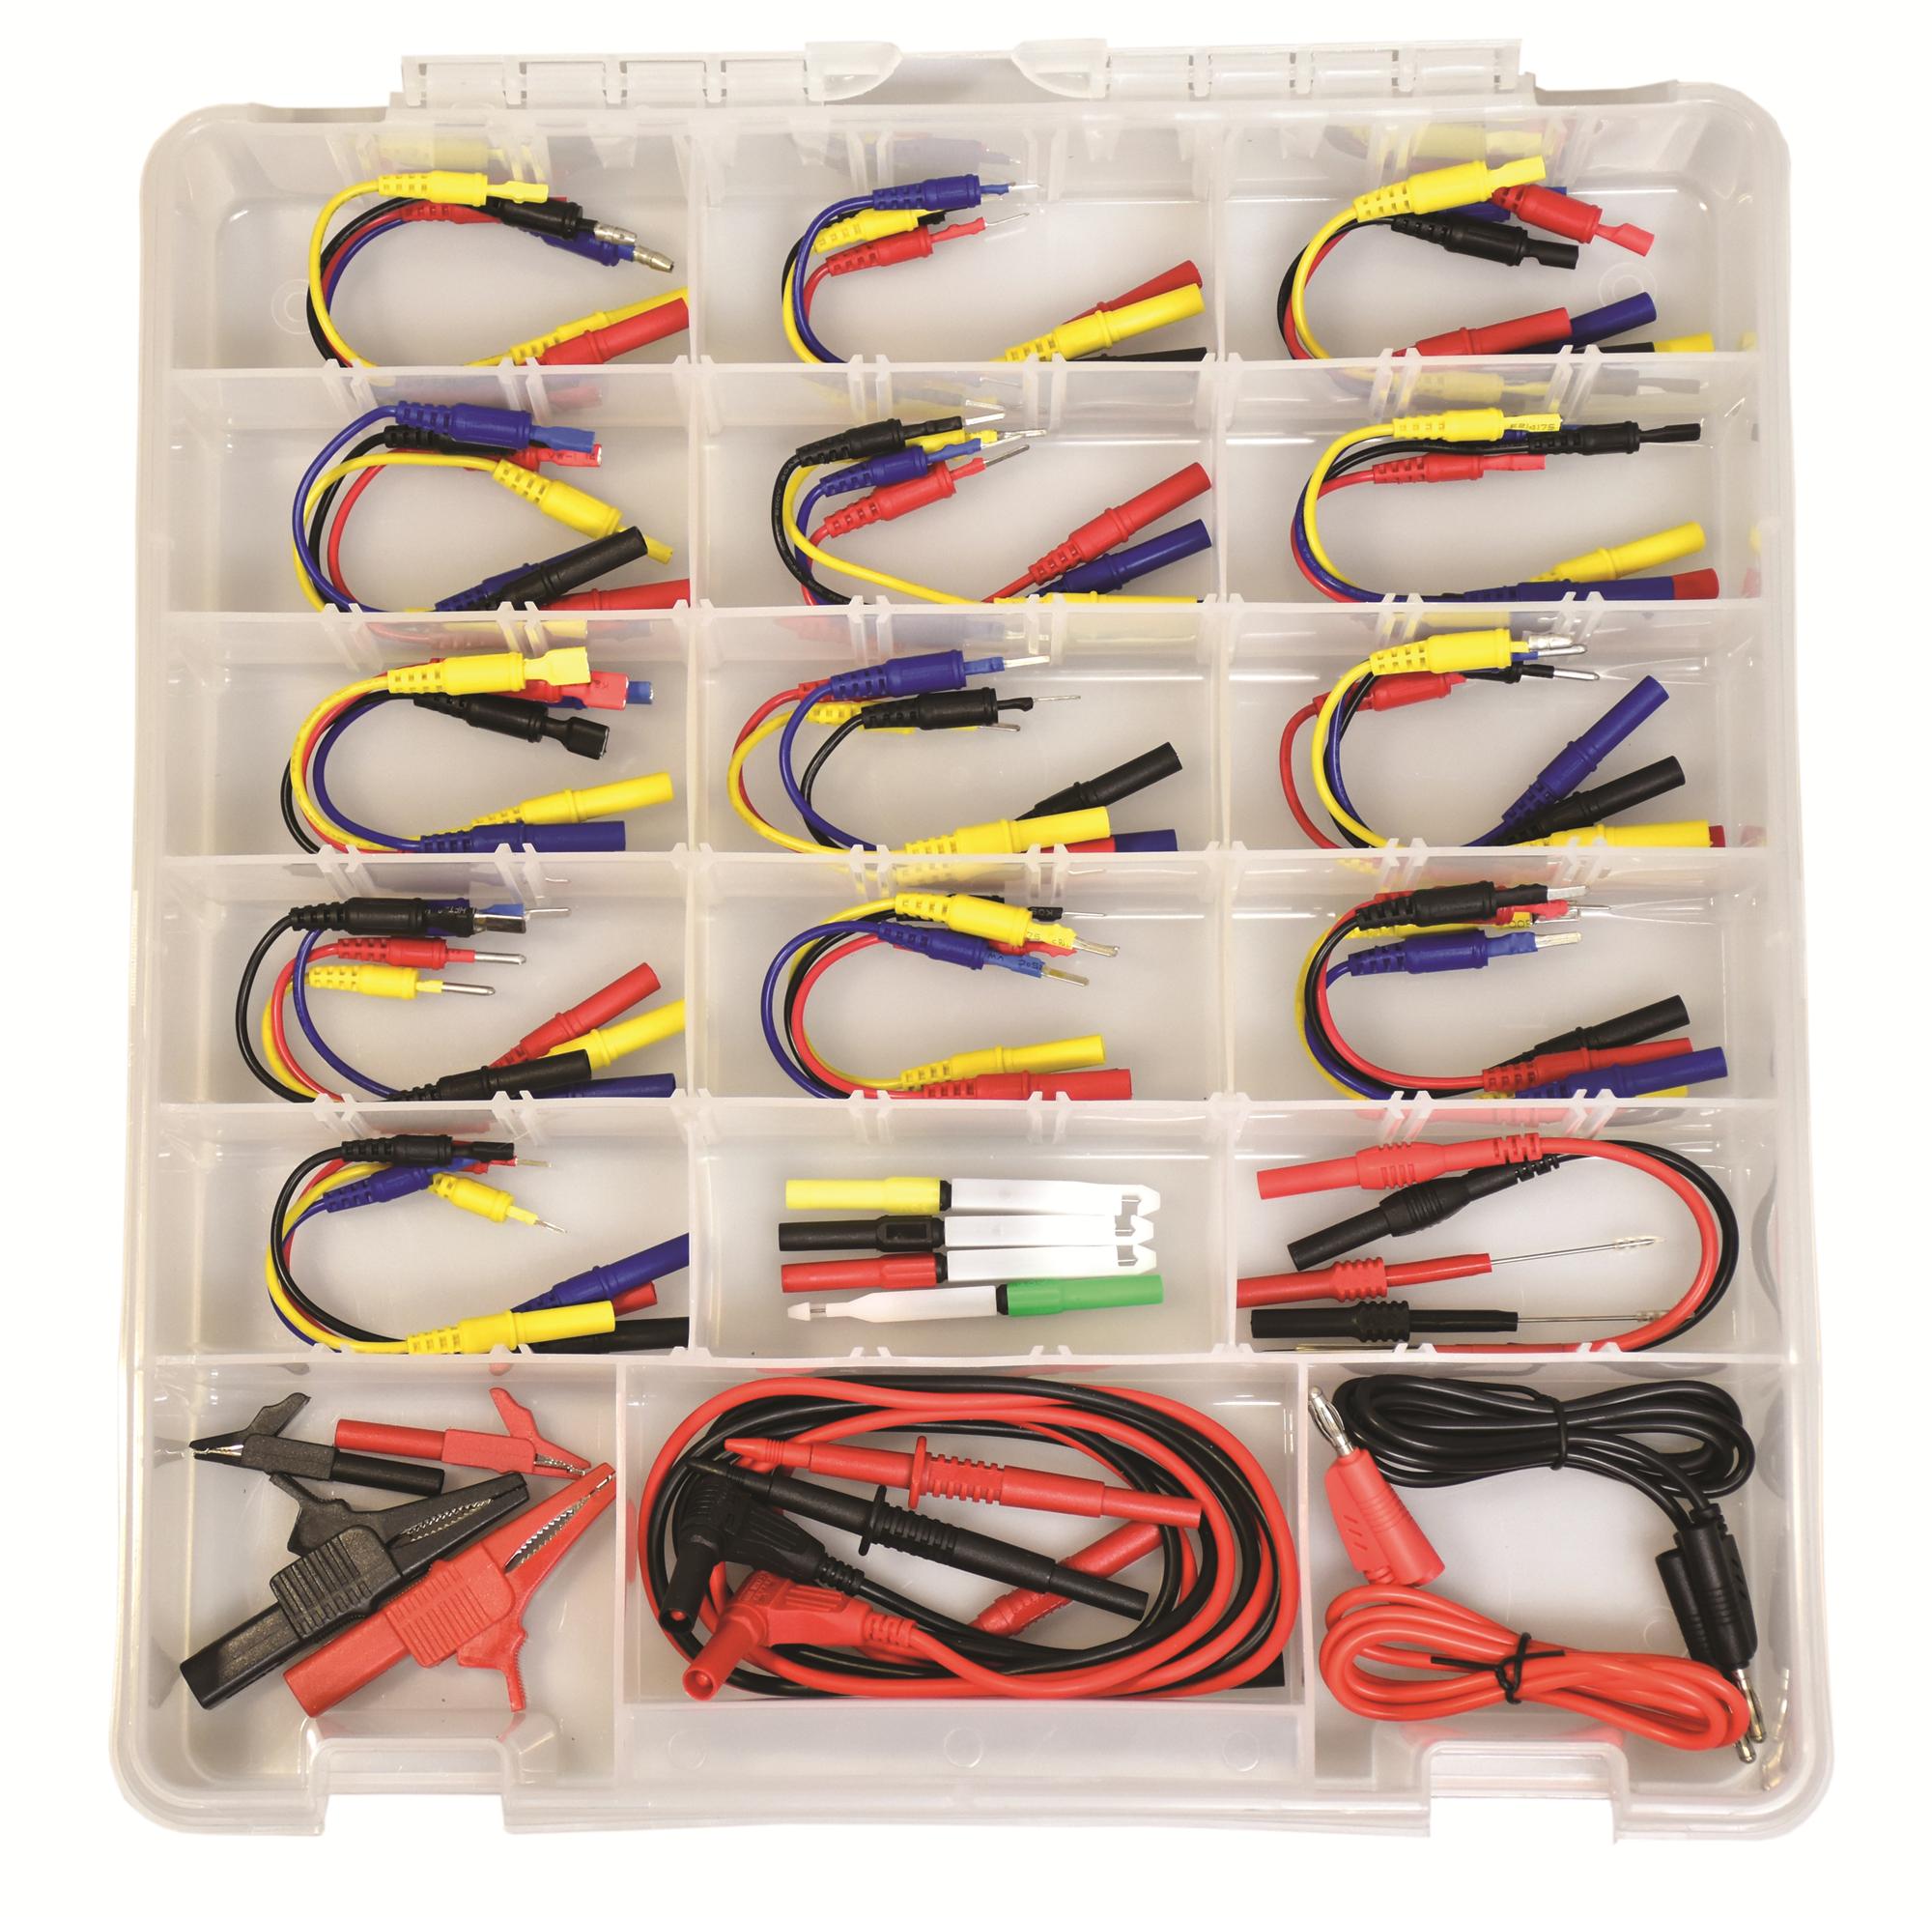 uTest Advanced Terminal Test Kit with adapters, probes, and terminals for  automotive connectors